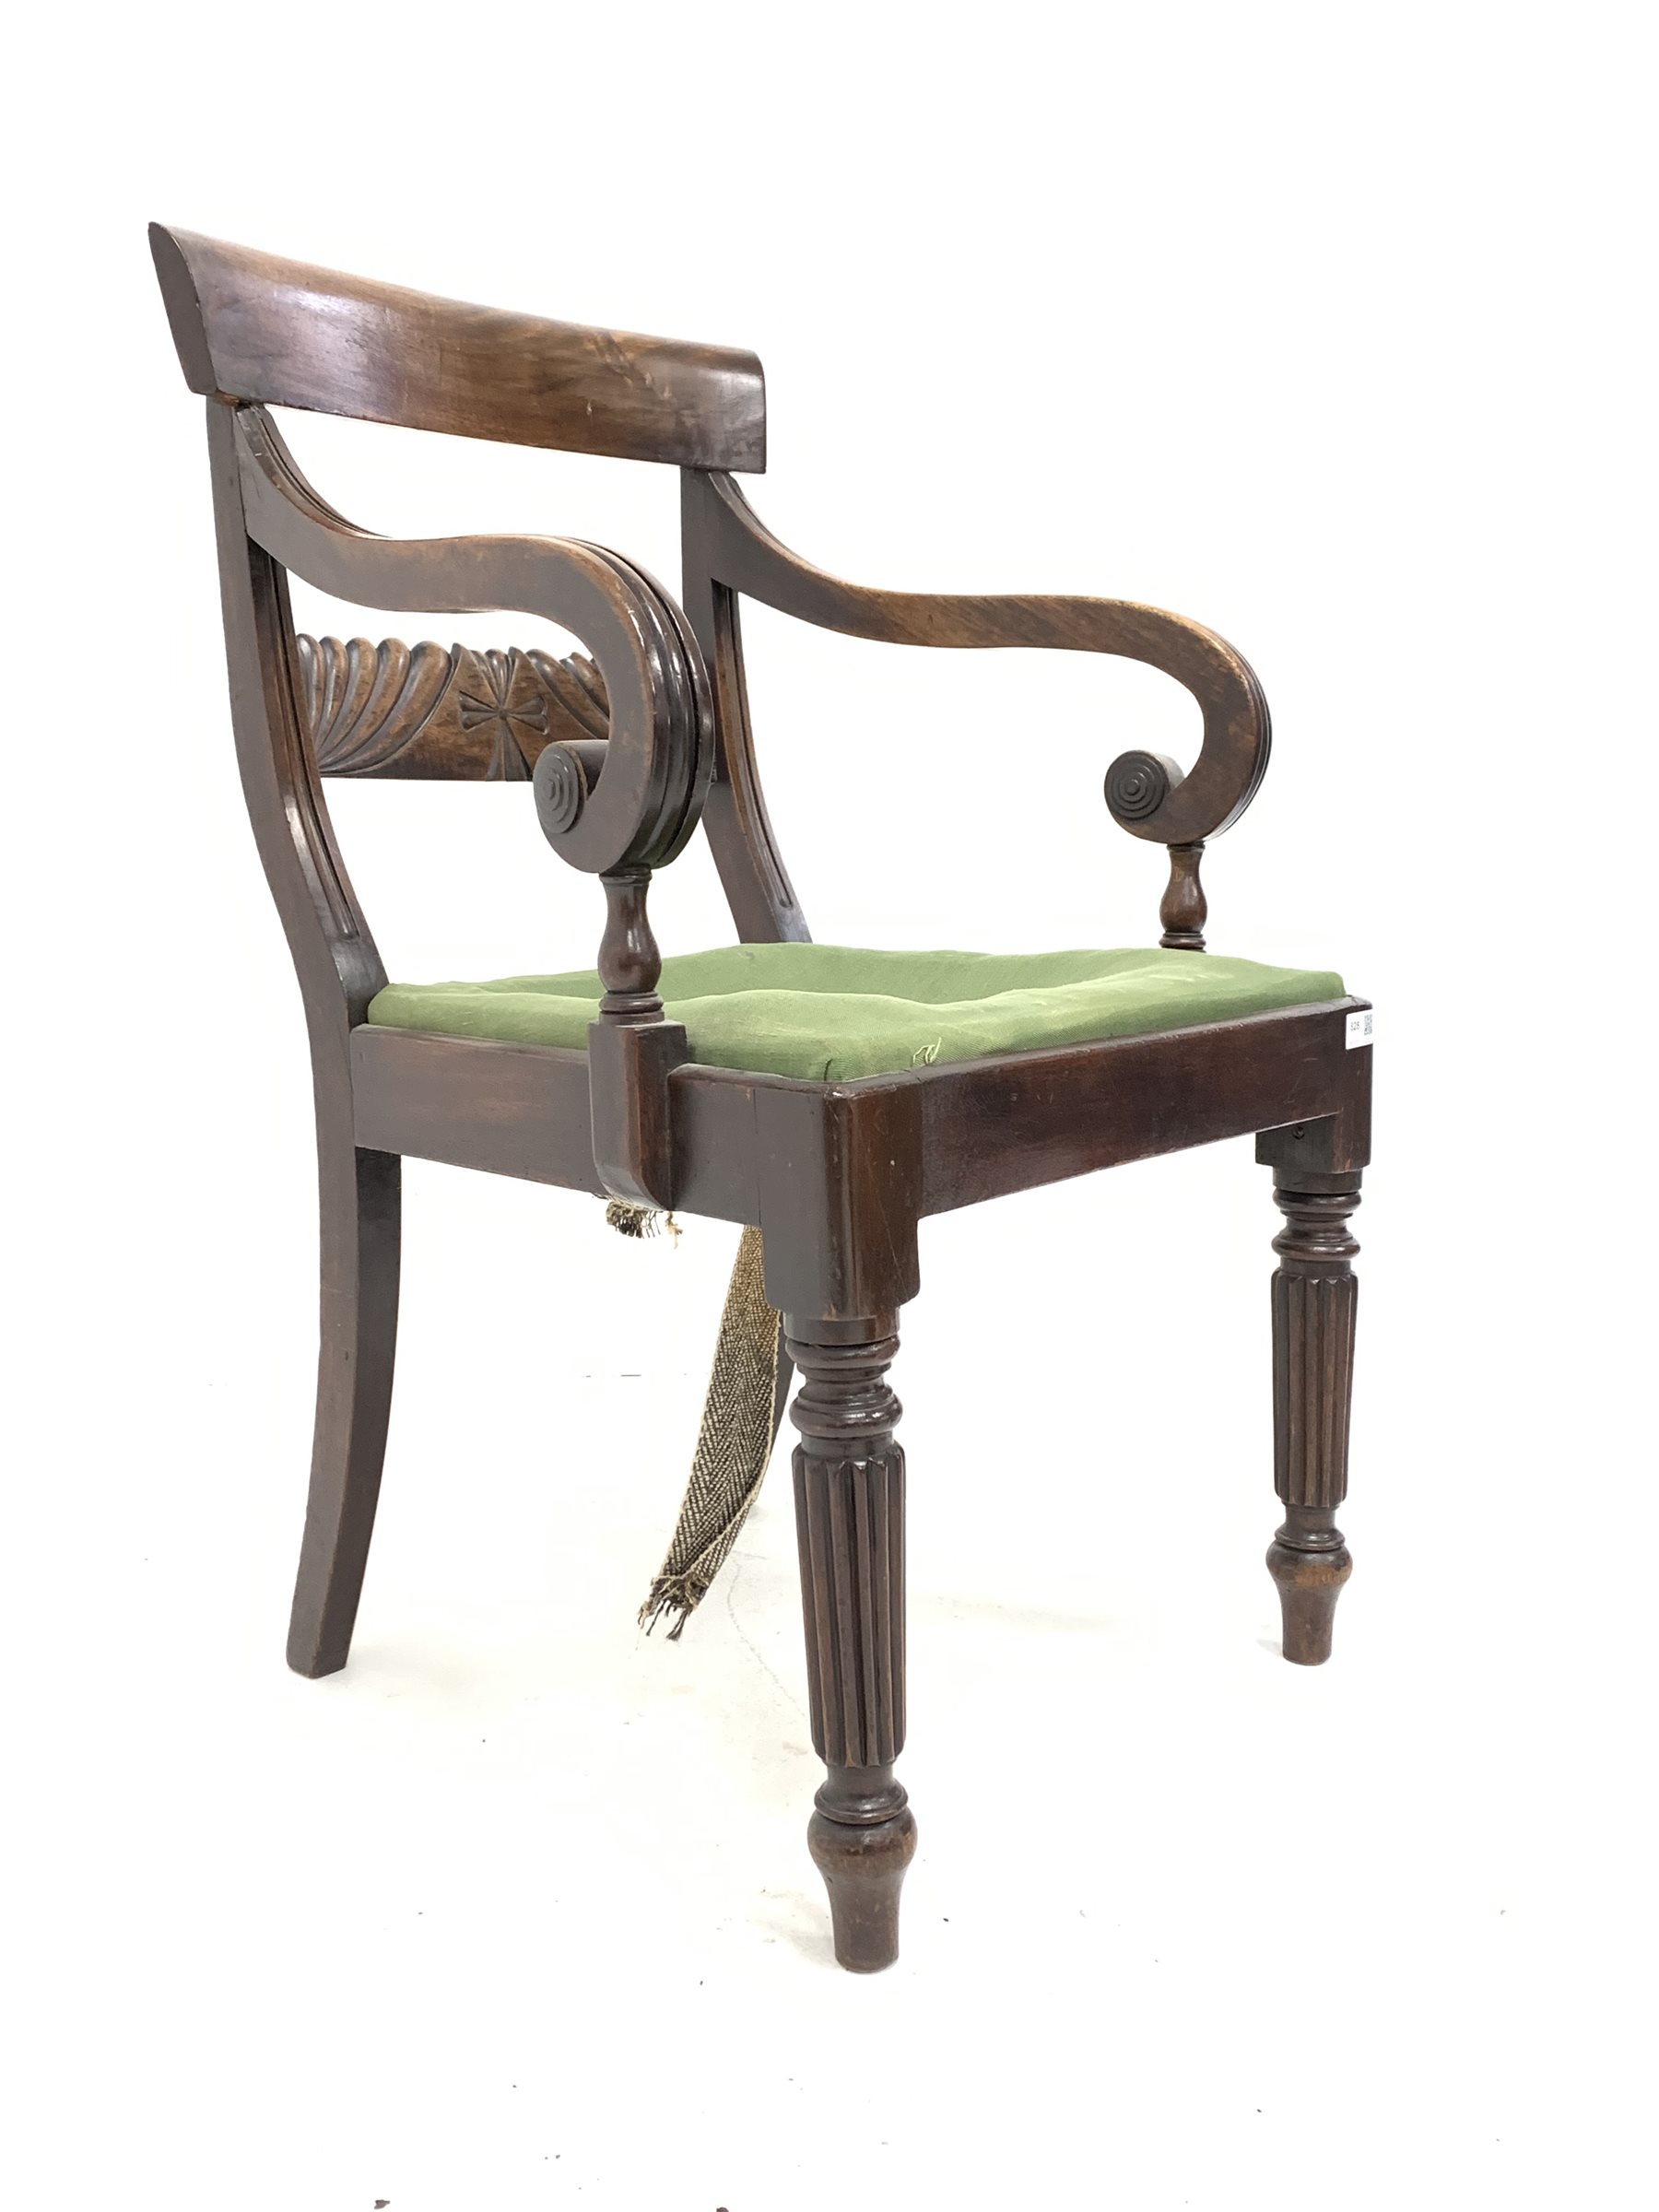 Regency mahogany elbow chair, lobe carved back rail, scrolled and reeded arm supports, drop in uphol - Image 2 of 3